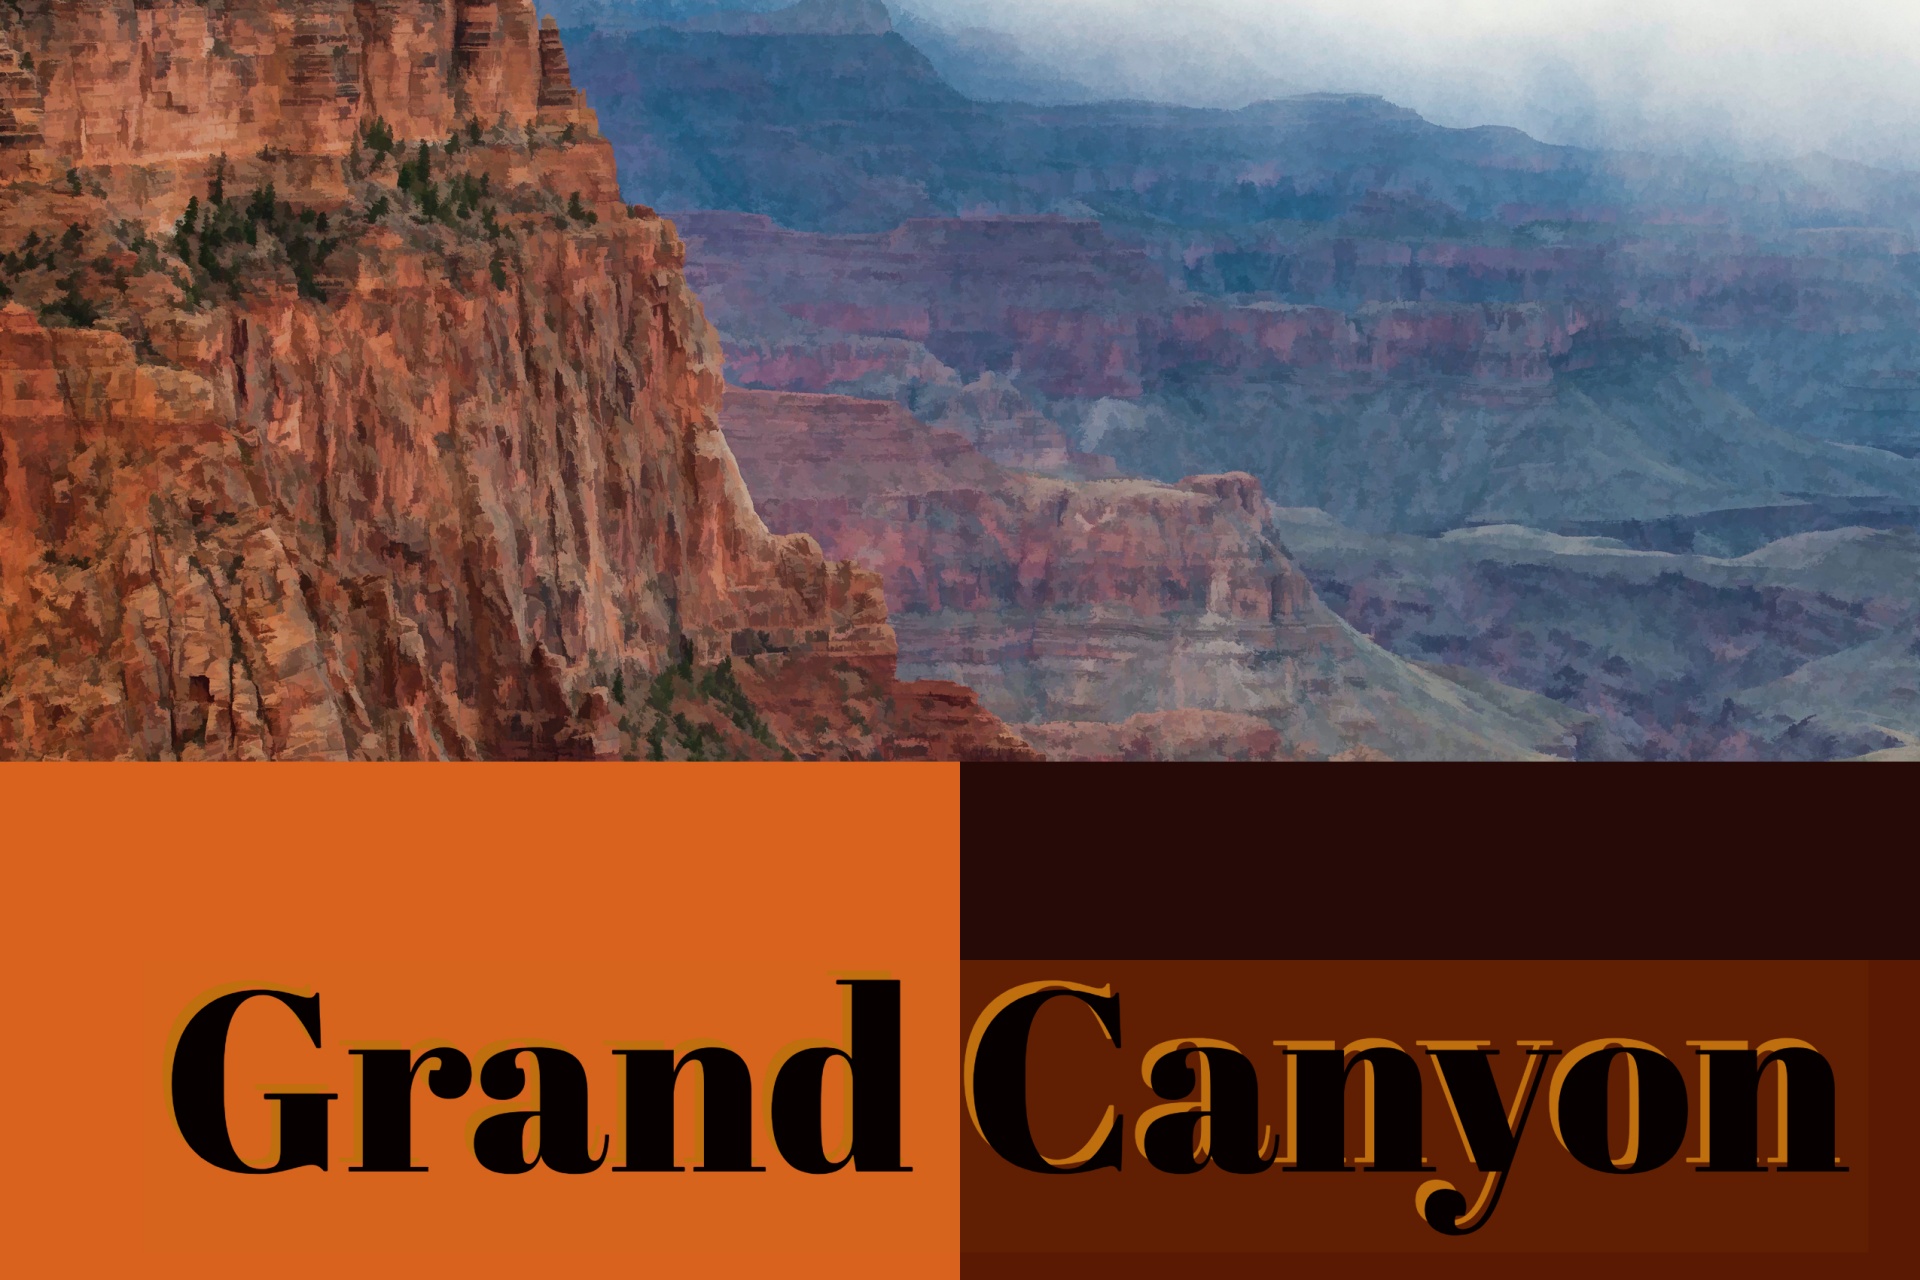 Arizona travel poster featuring the grand canyon